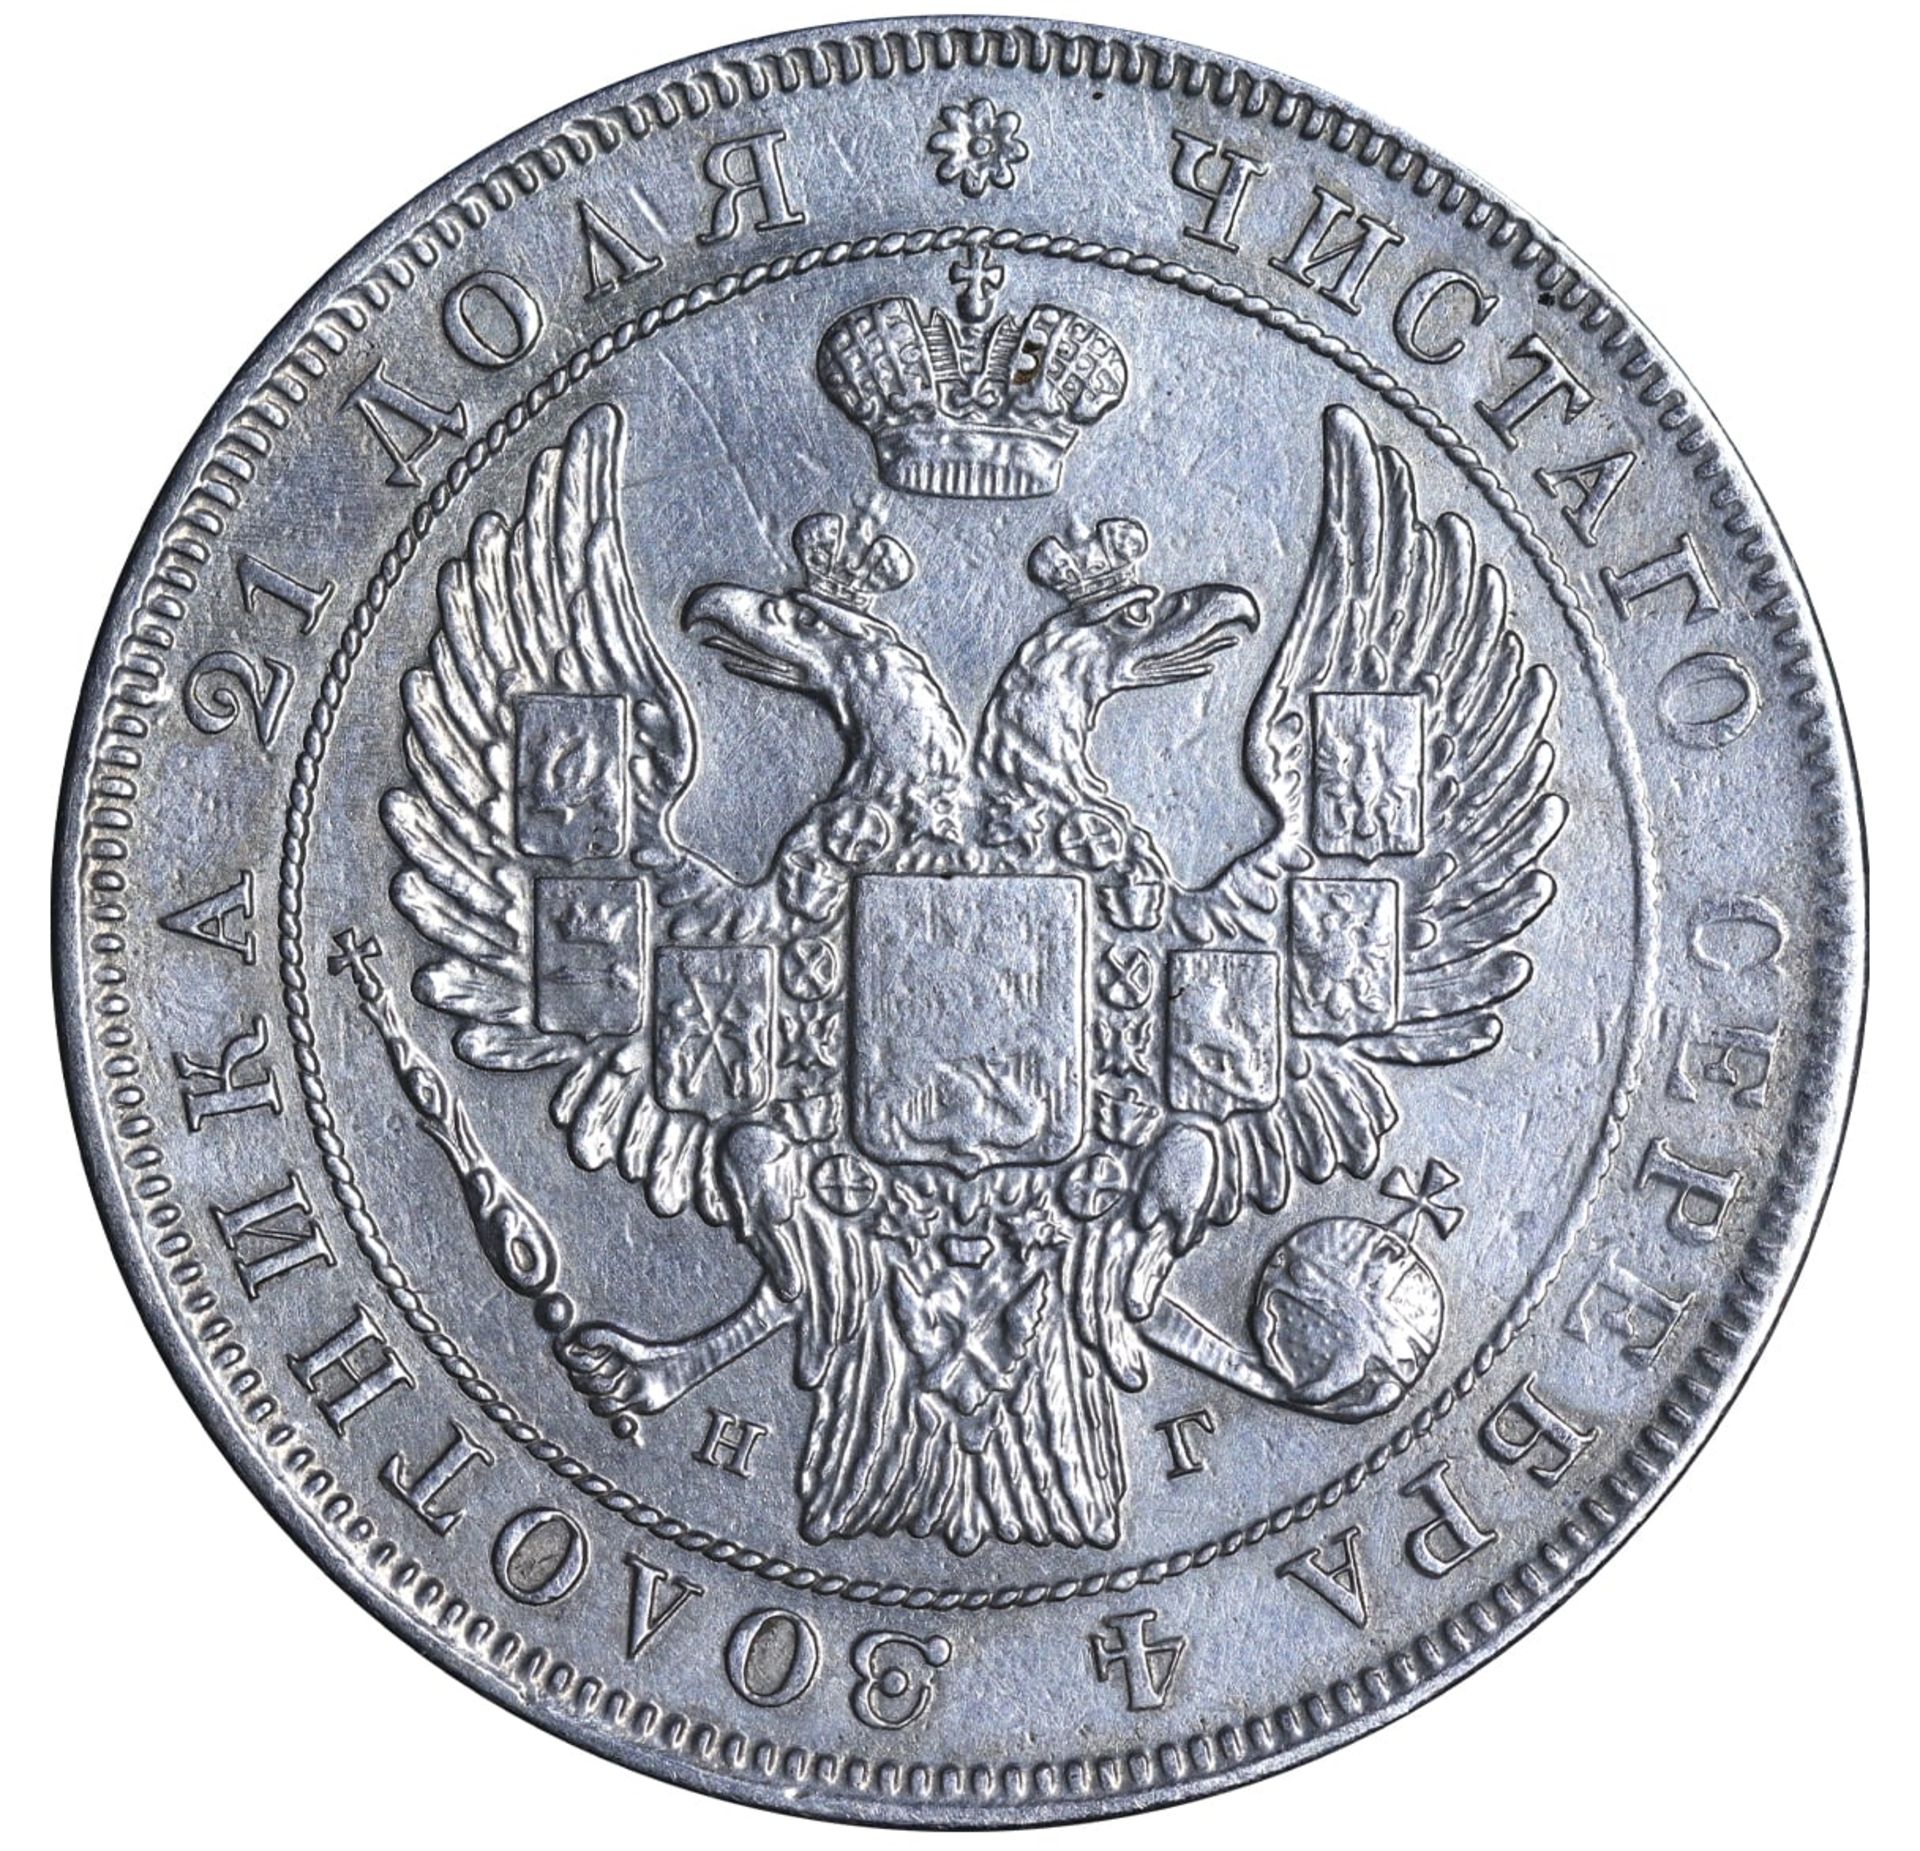 Russian Empire, 1 Rouble, 1832 year, SPB-NG - Image 3 of 3